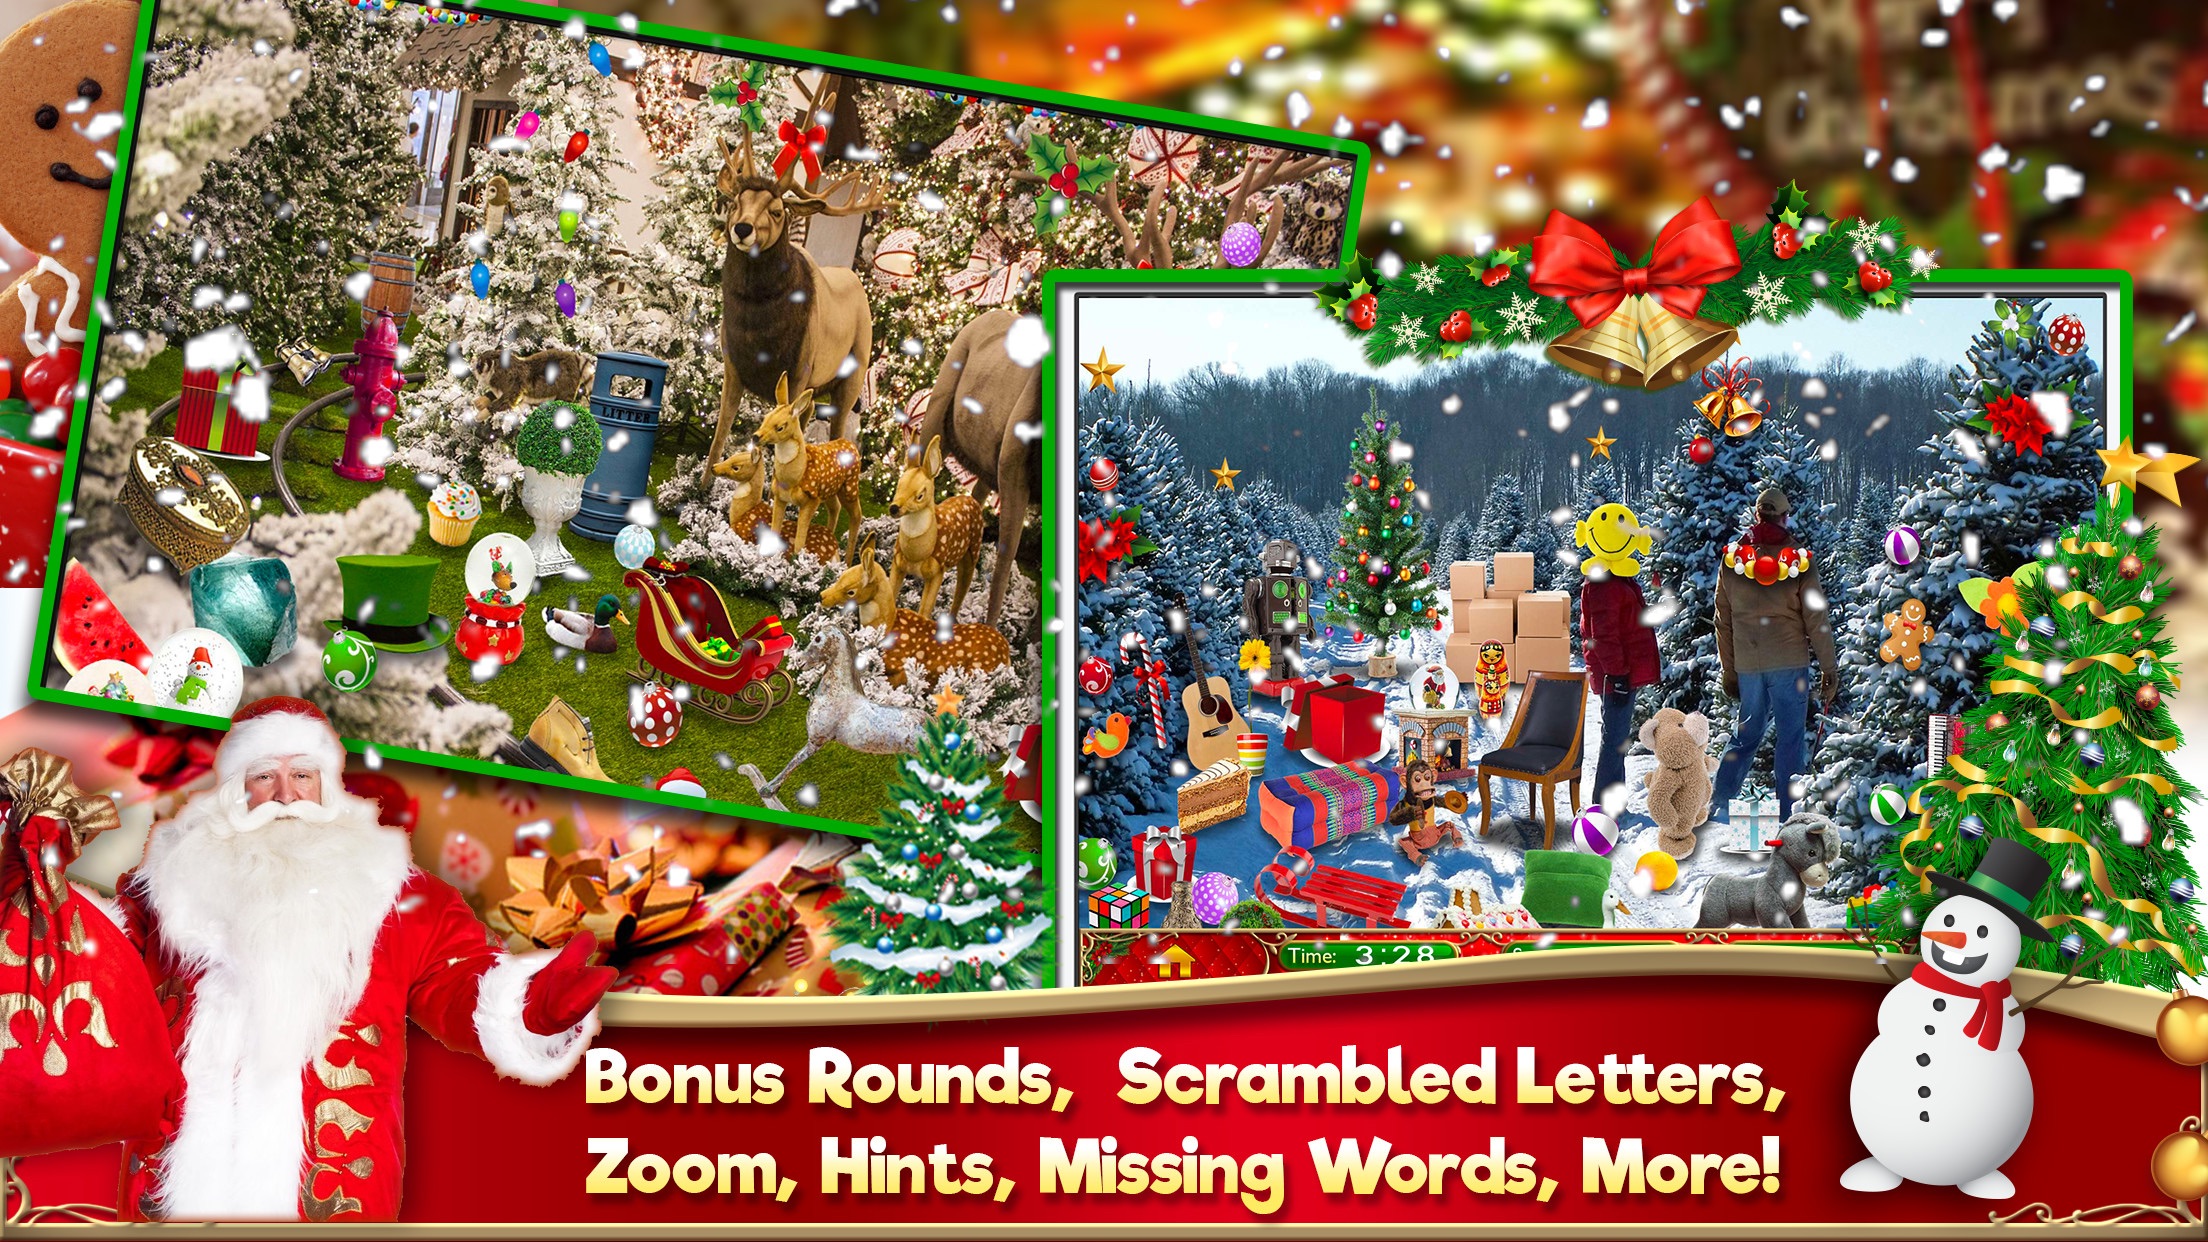 Hidden Objects Travel Adventure and Holiday Quest - Seek & Find Object Puzzle Gameのおすすめ画像2